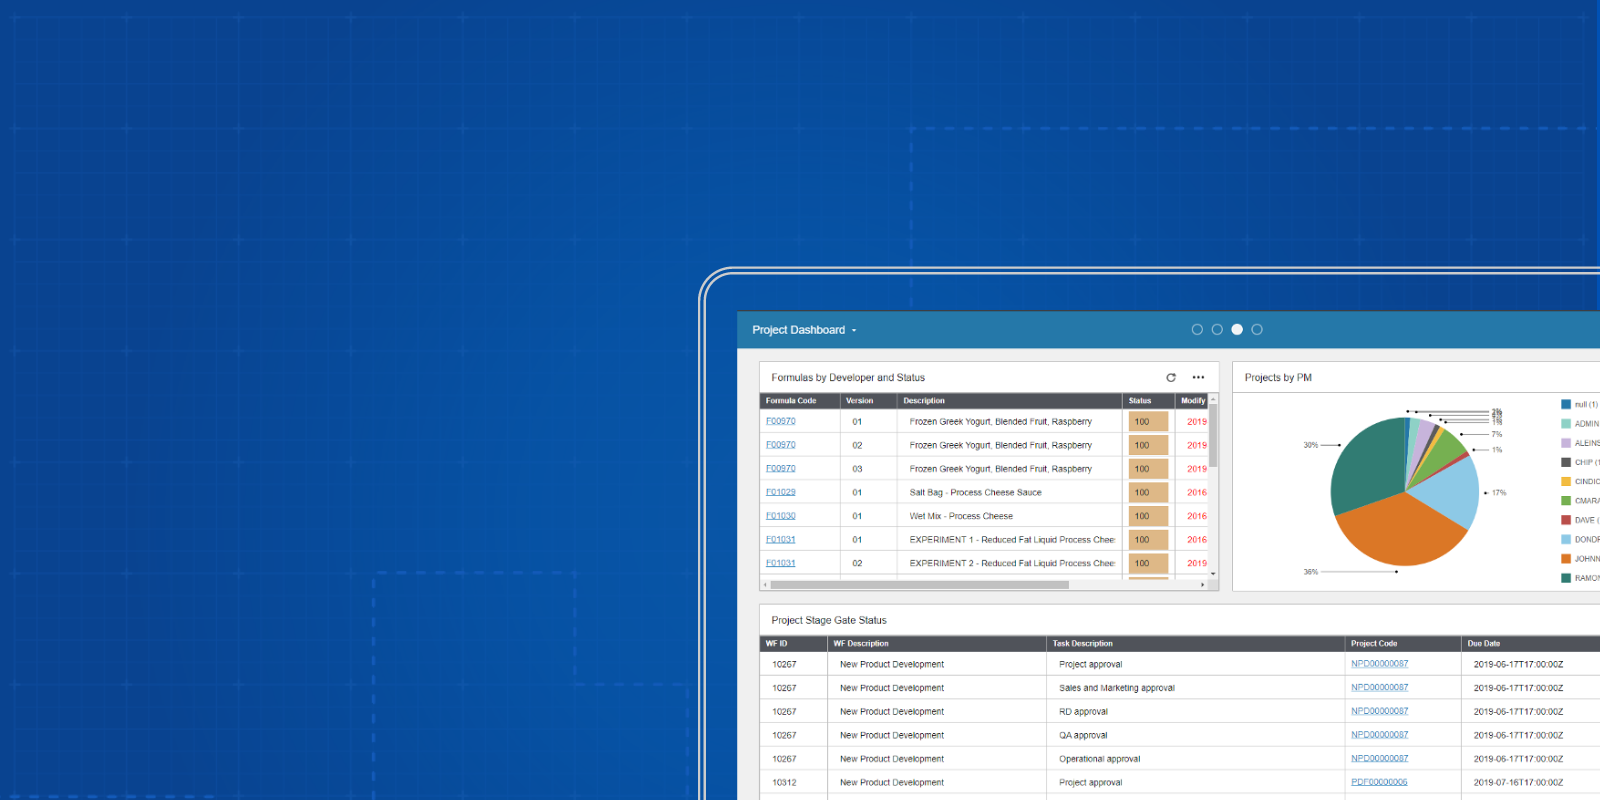 screenshot of plm process software dashboard over a blue background